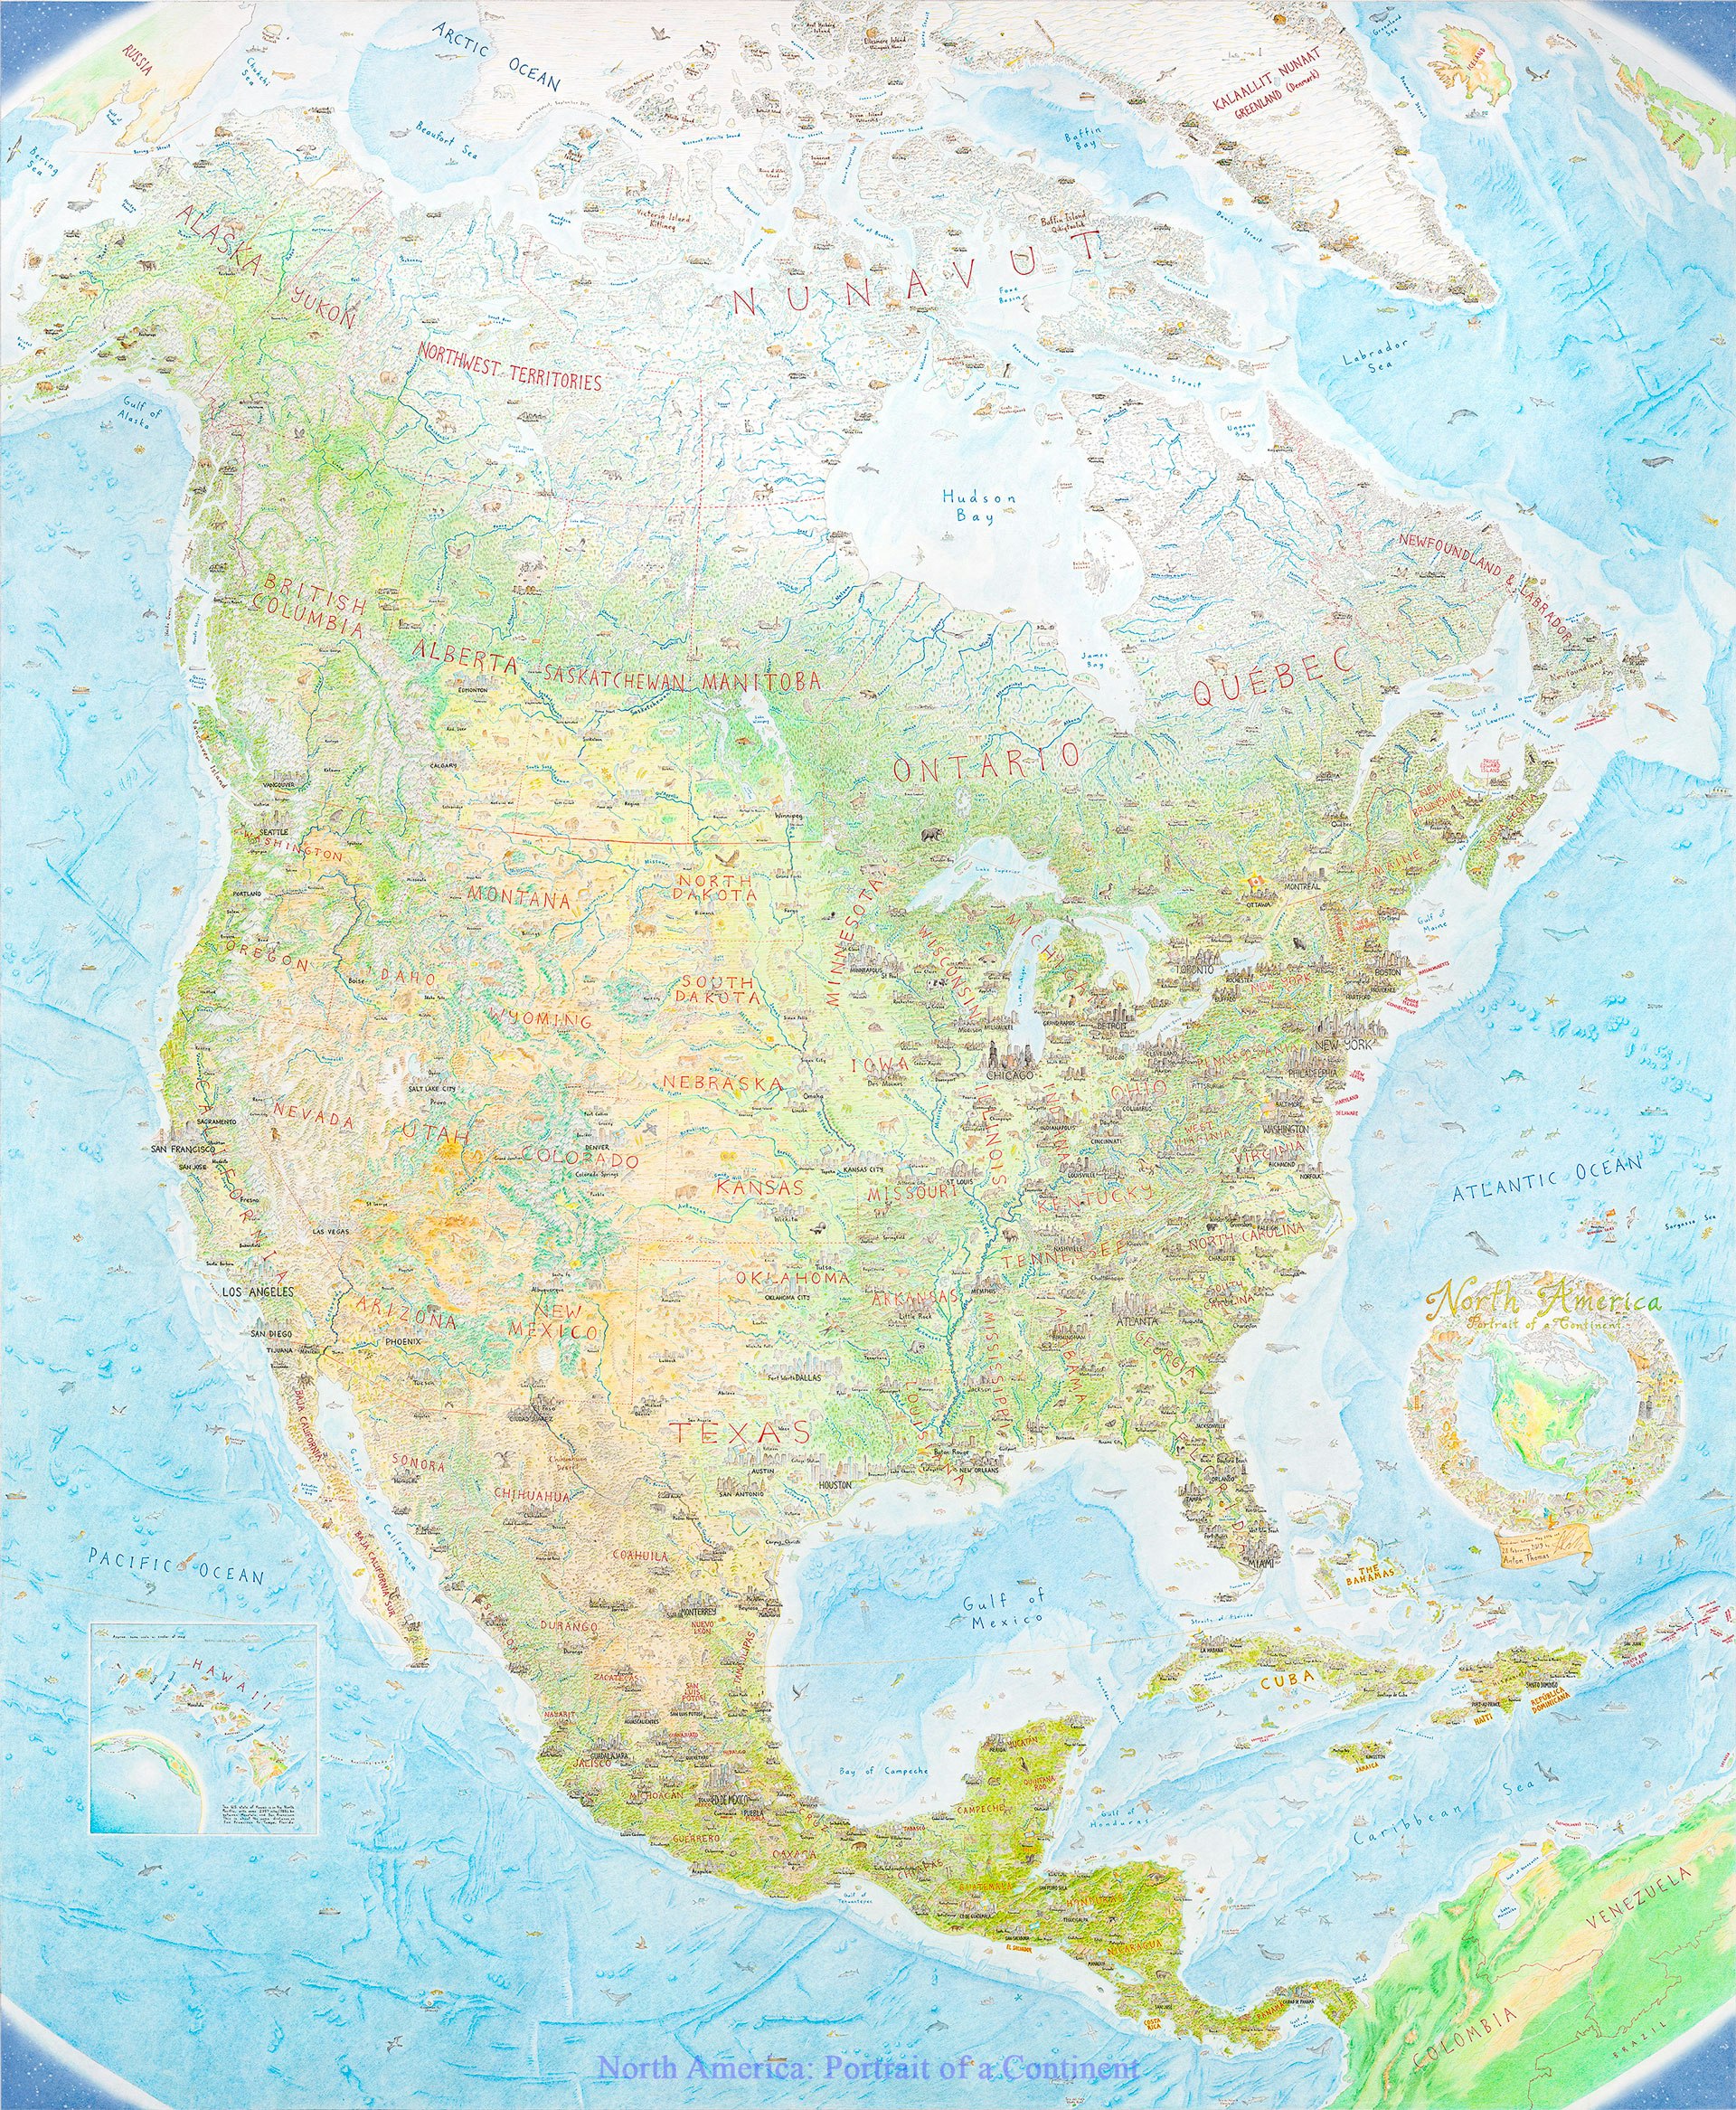 A full picture of the North America map